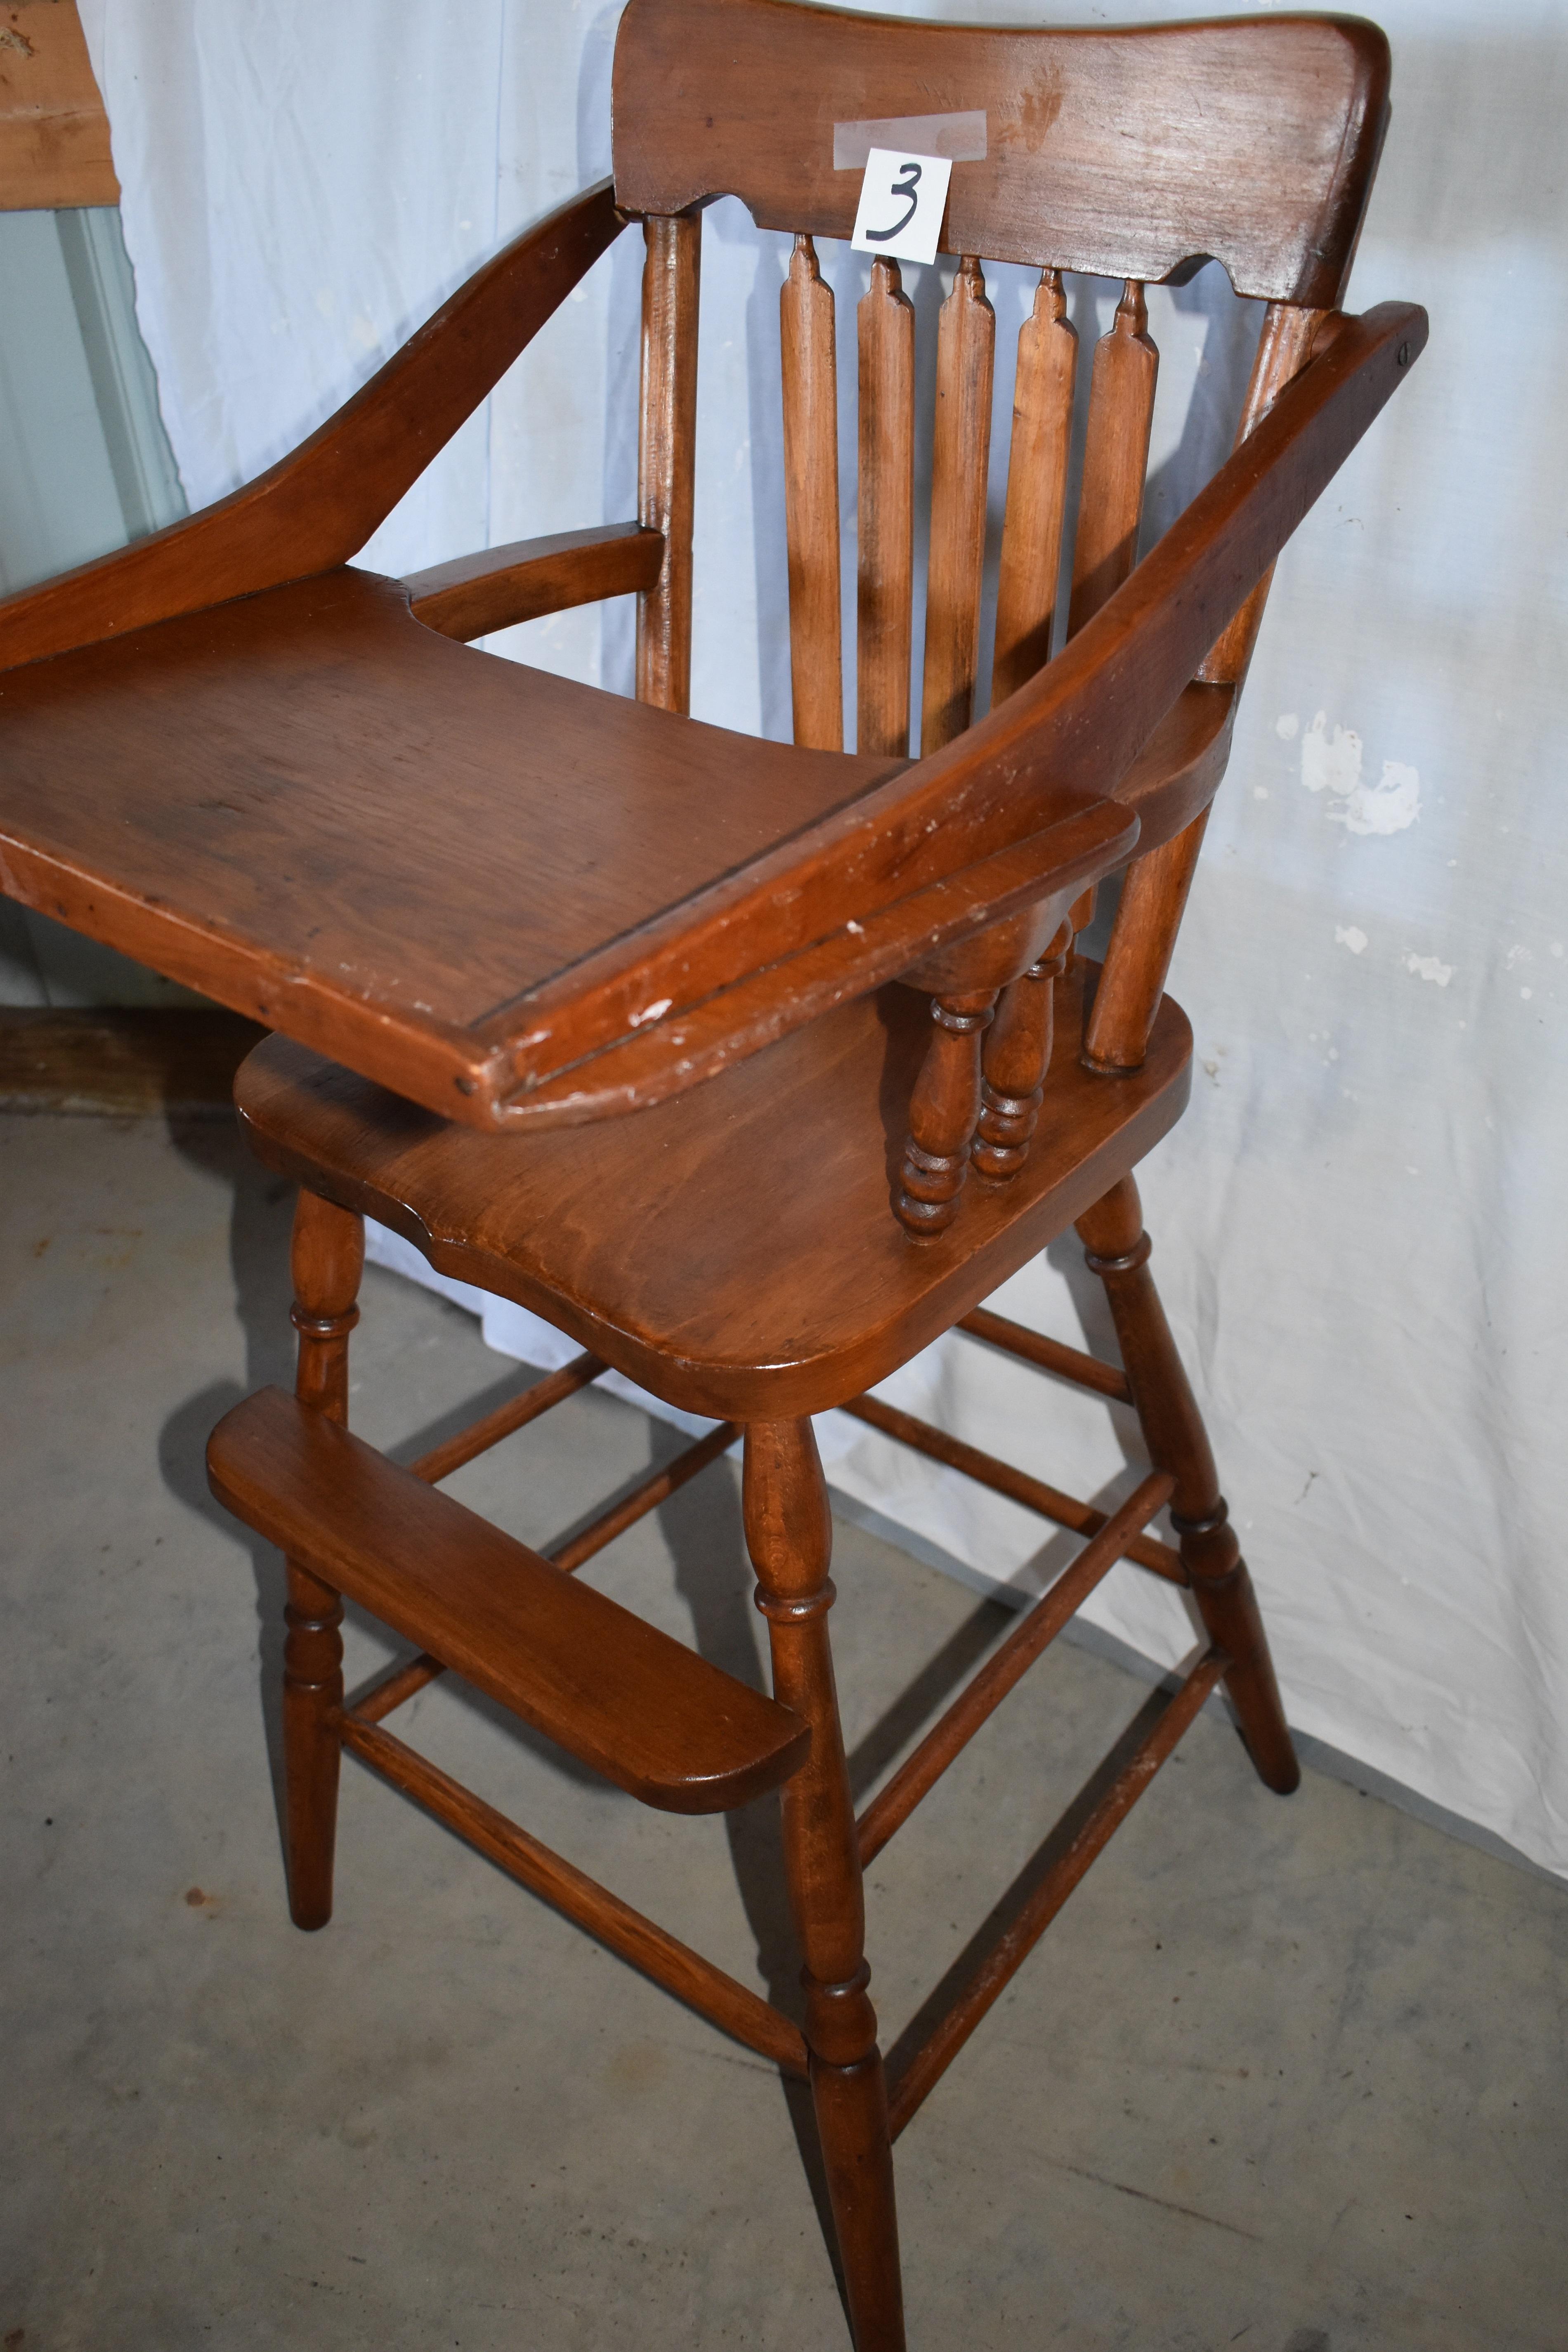 Old Spindle Back Childs' High Chair, Wood, Tray, 39"h X 18"w X 13" Se